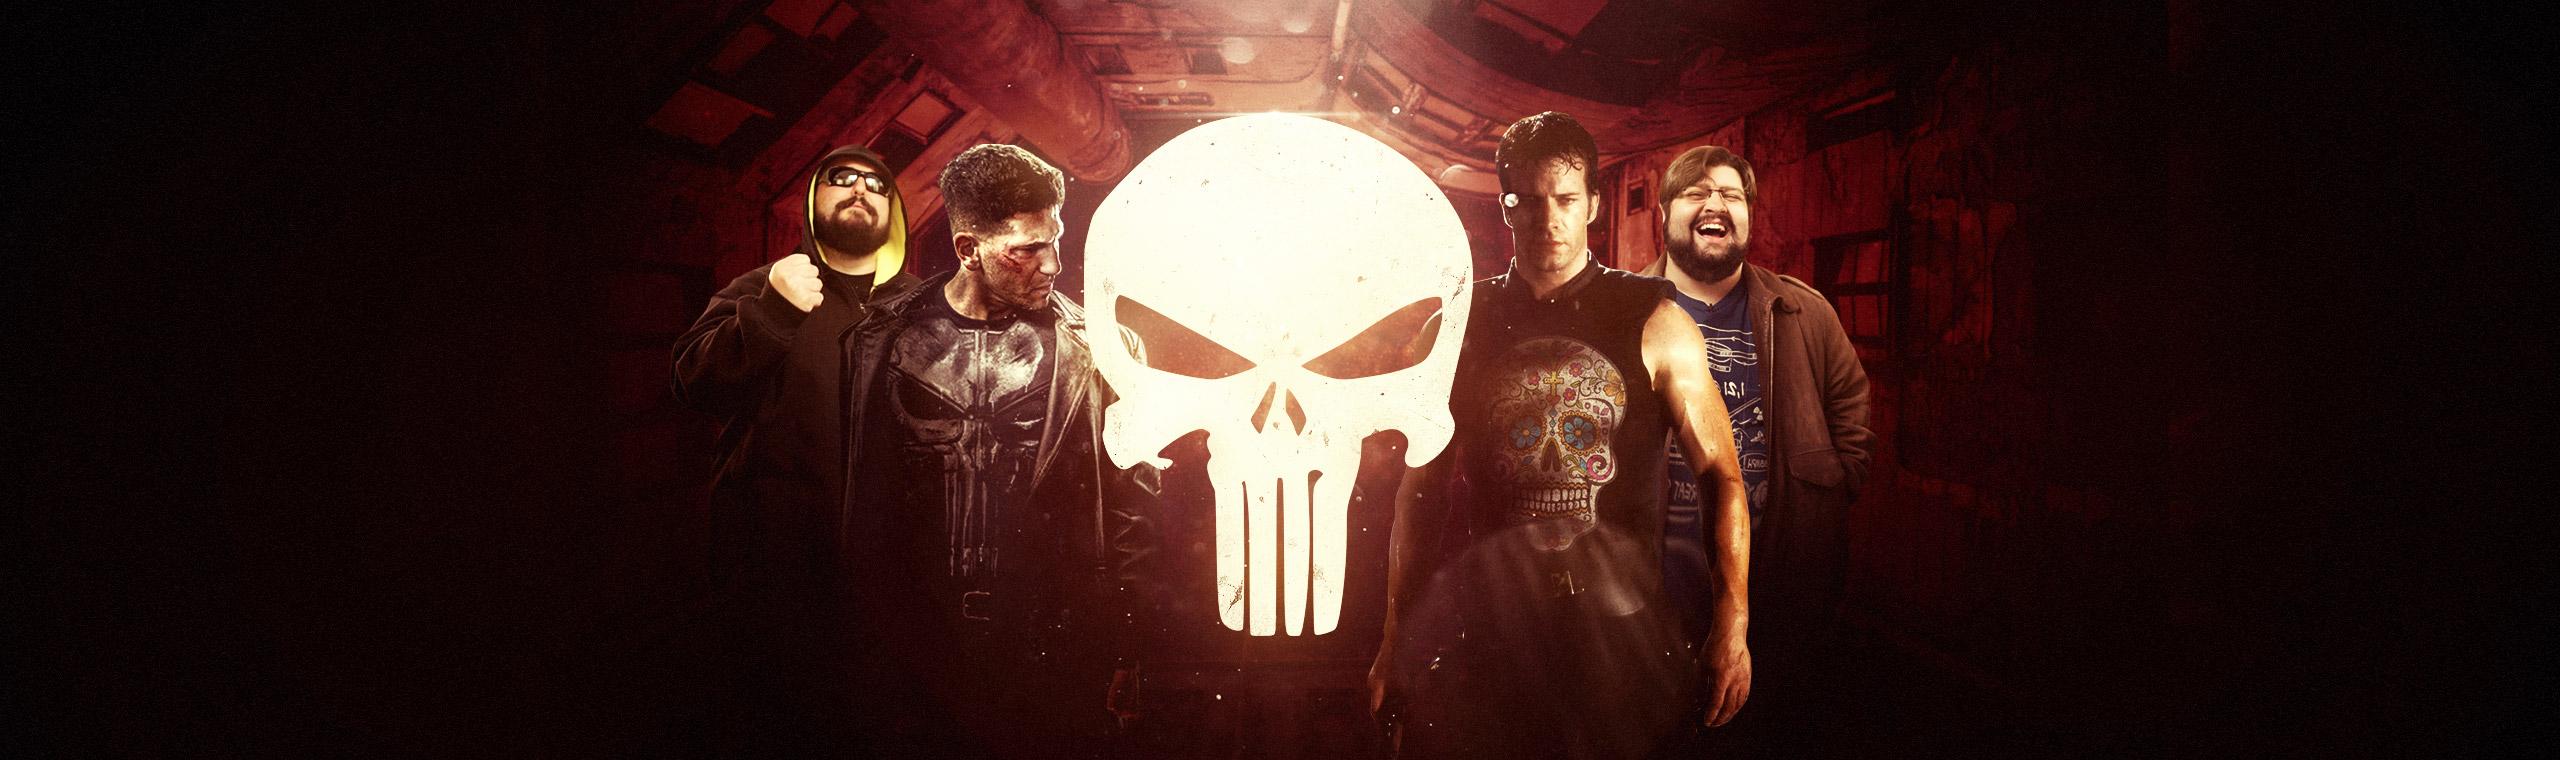 Justiceiro, Punisher e Psicopata  